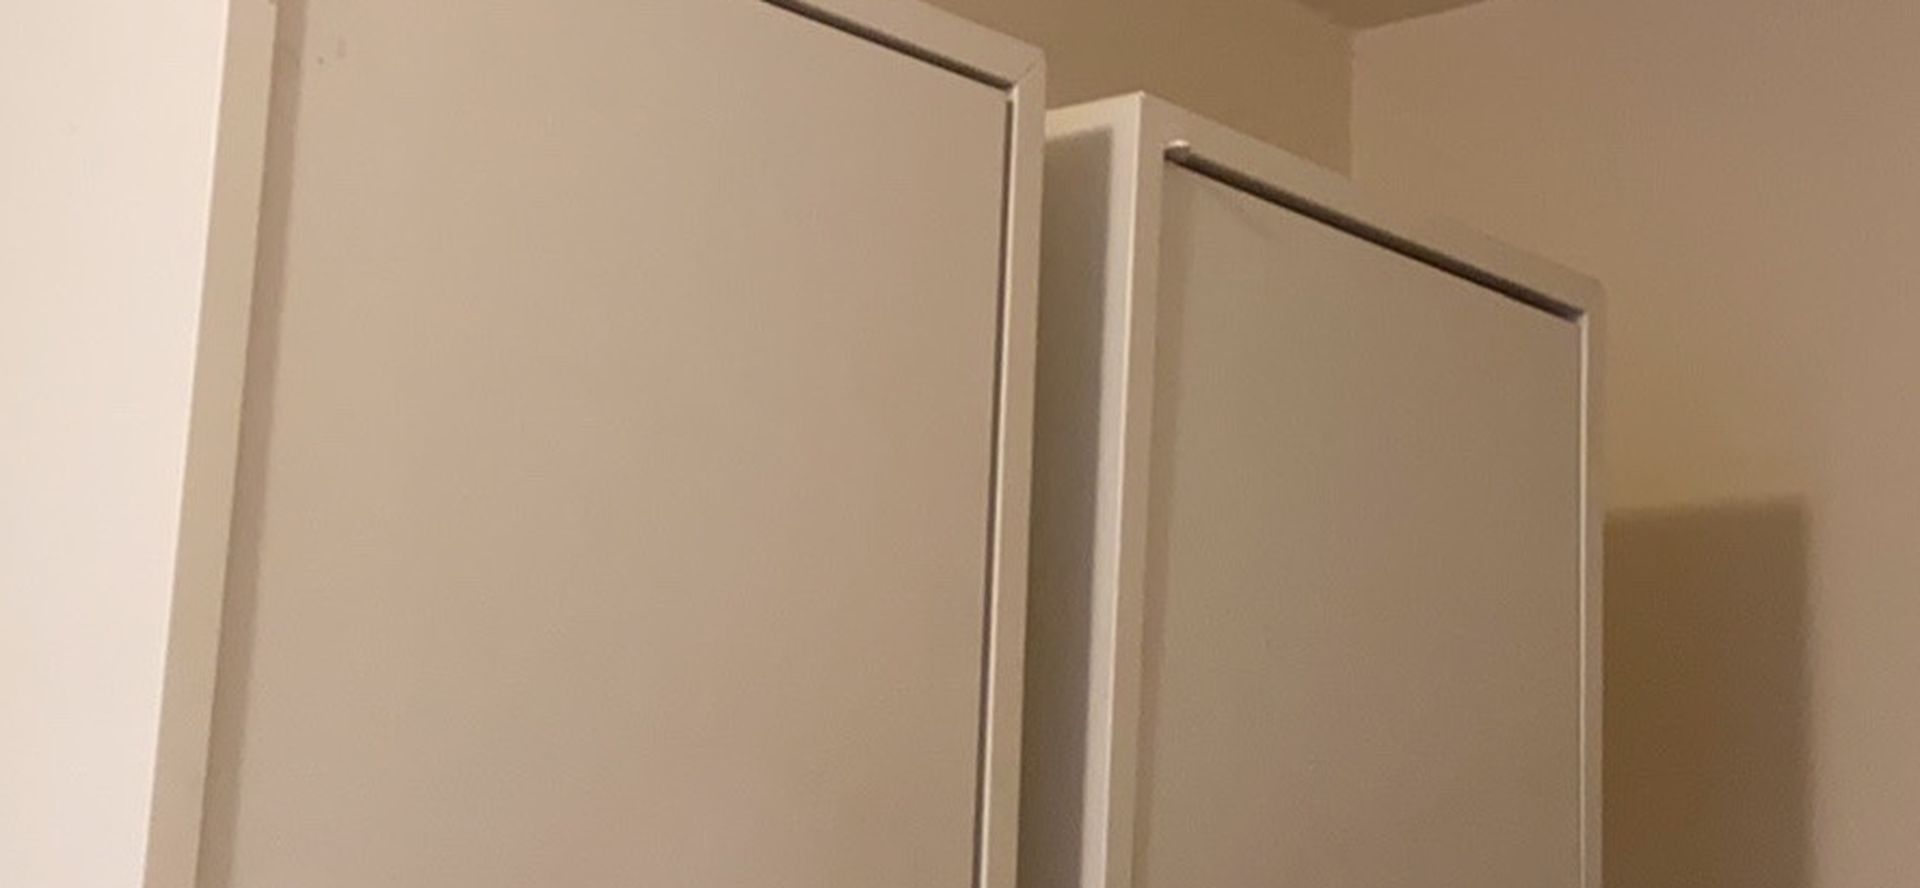 Floating Shelves With Door And Hardware IKEA Storage